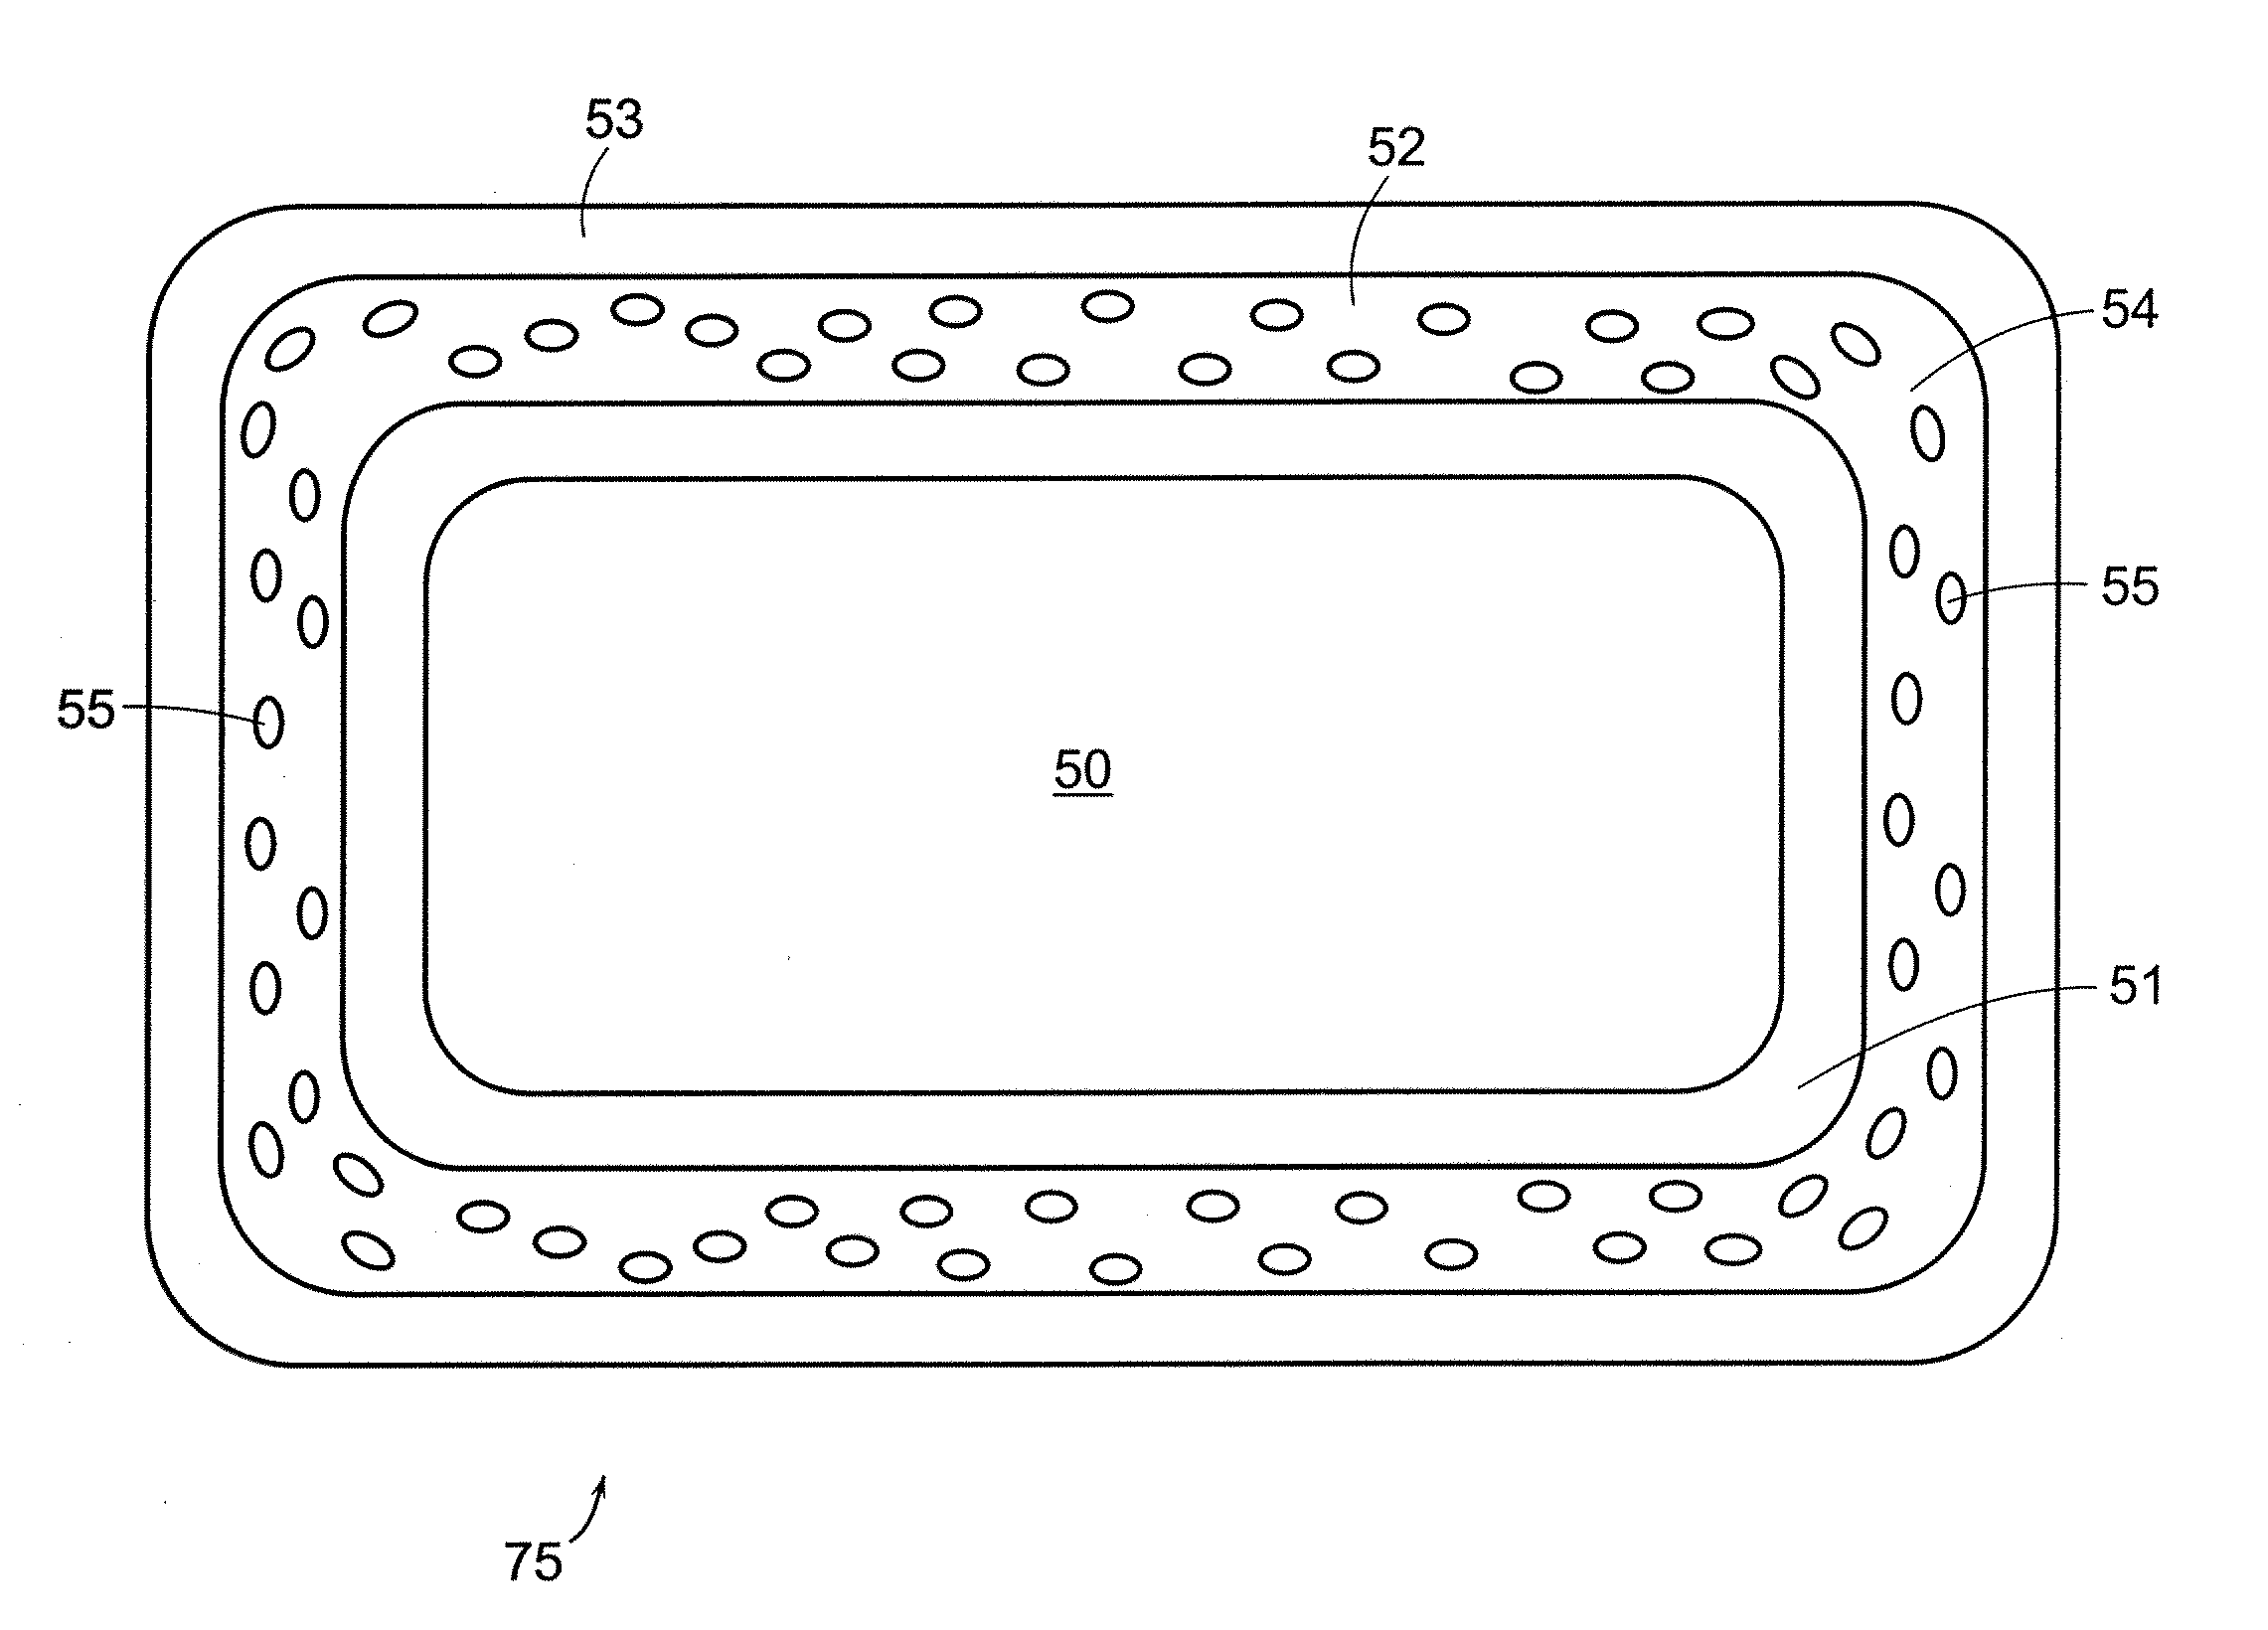 Apparatus and method for delivery of mitomycin through an eluting biocompatible implantable medical device